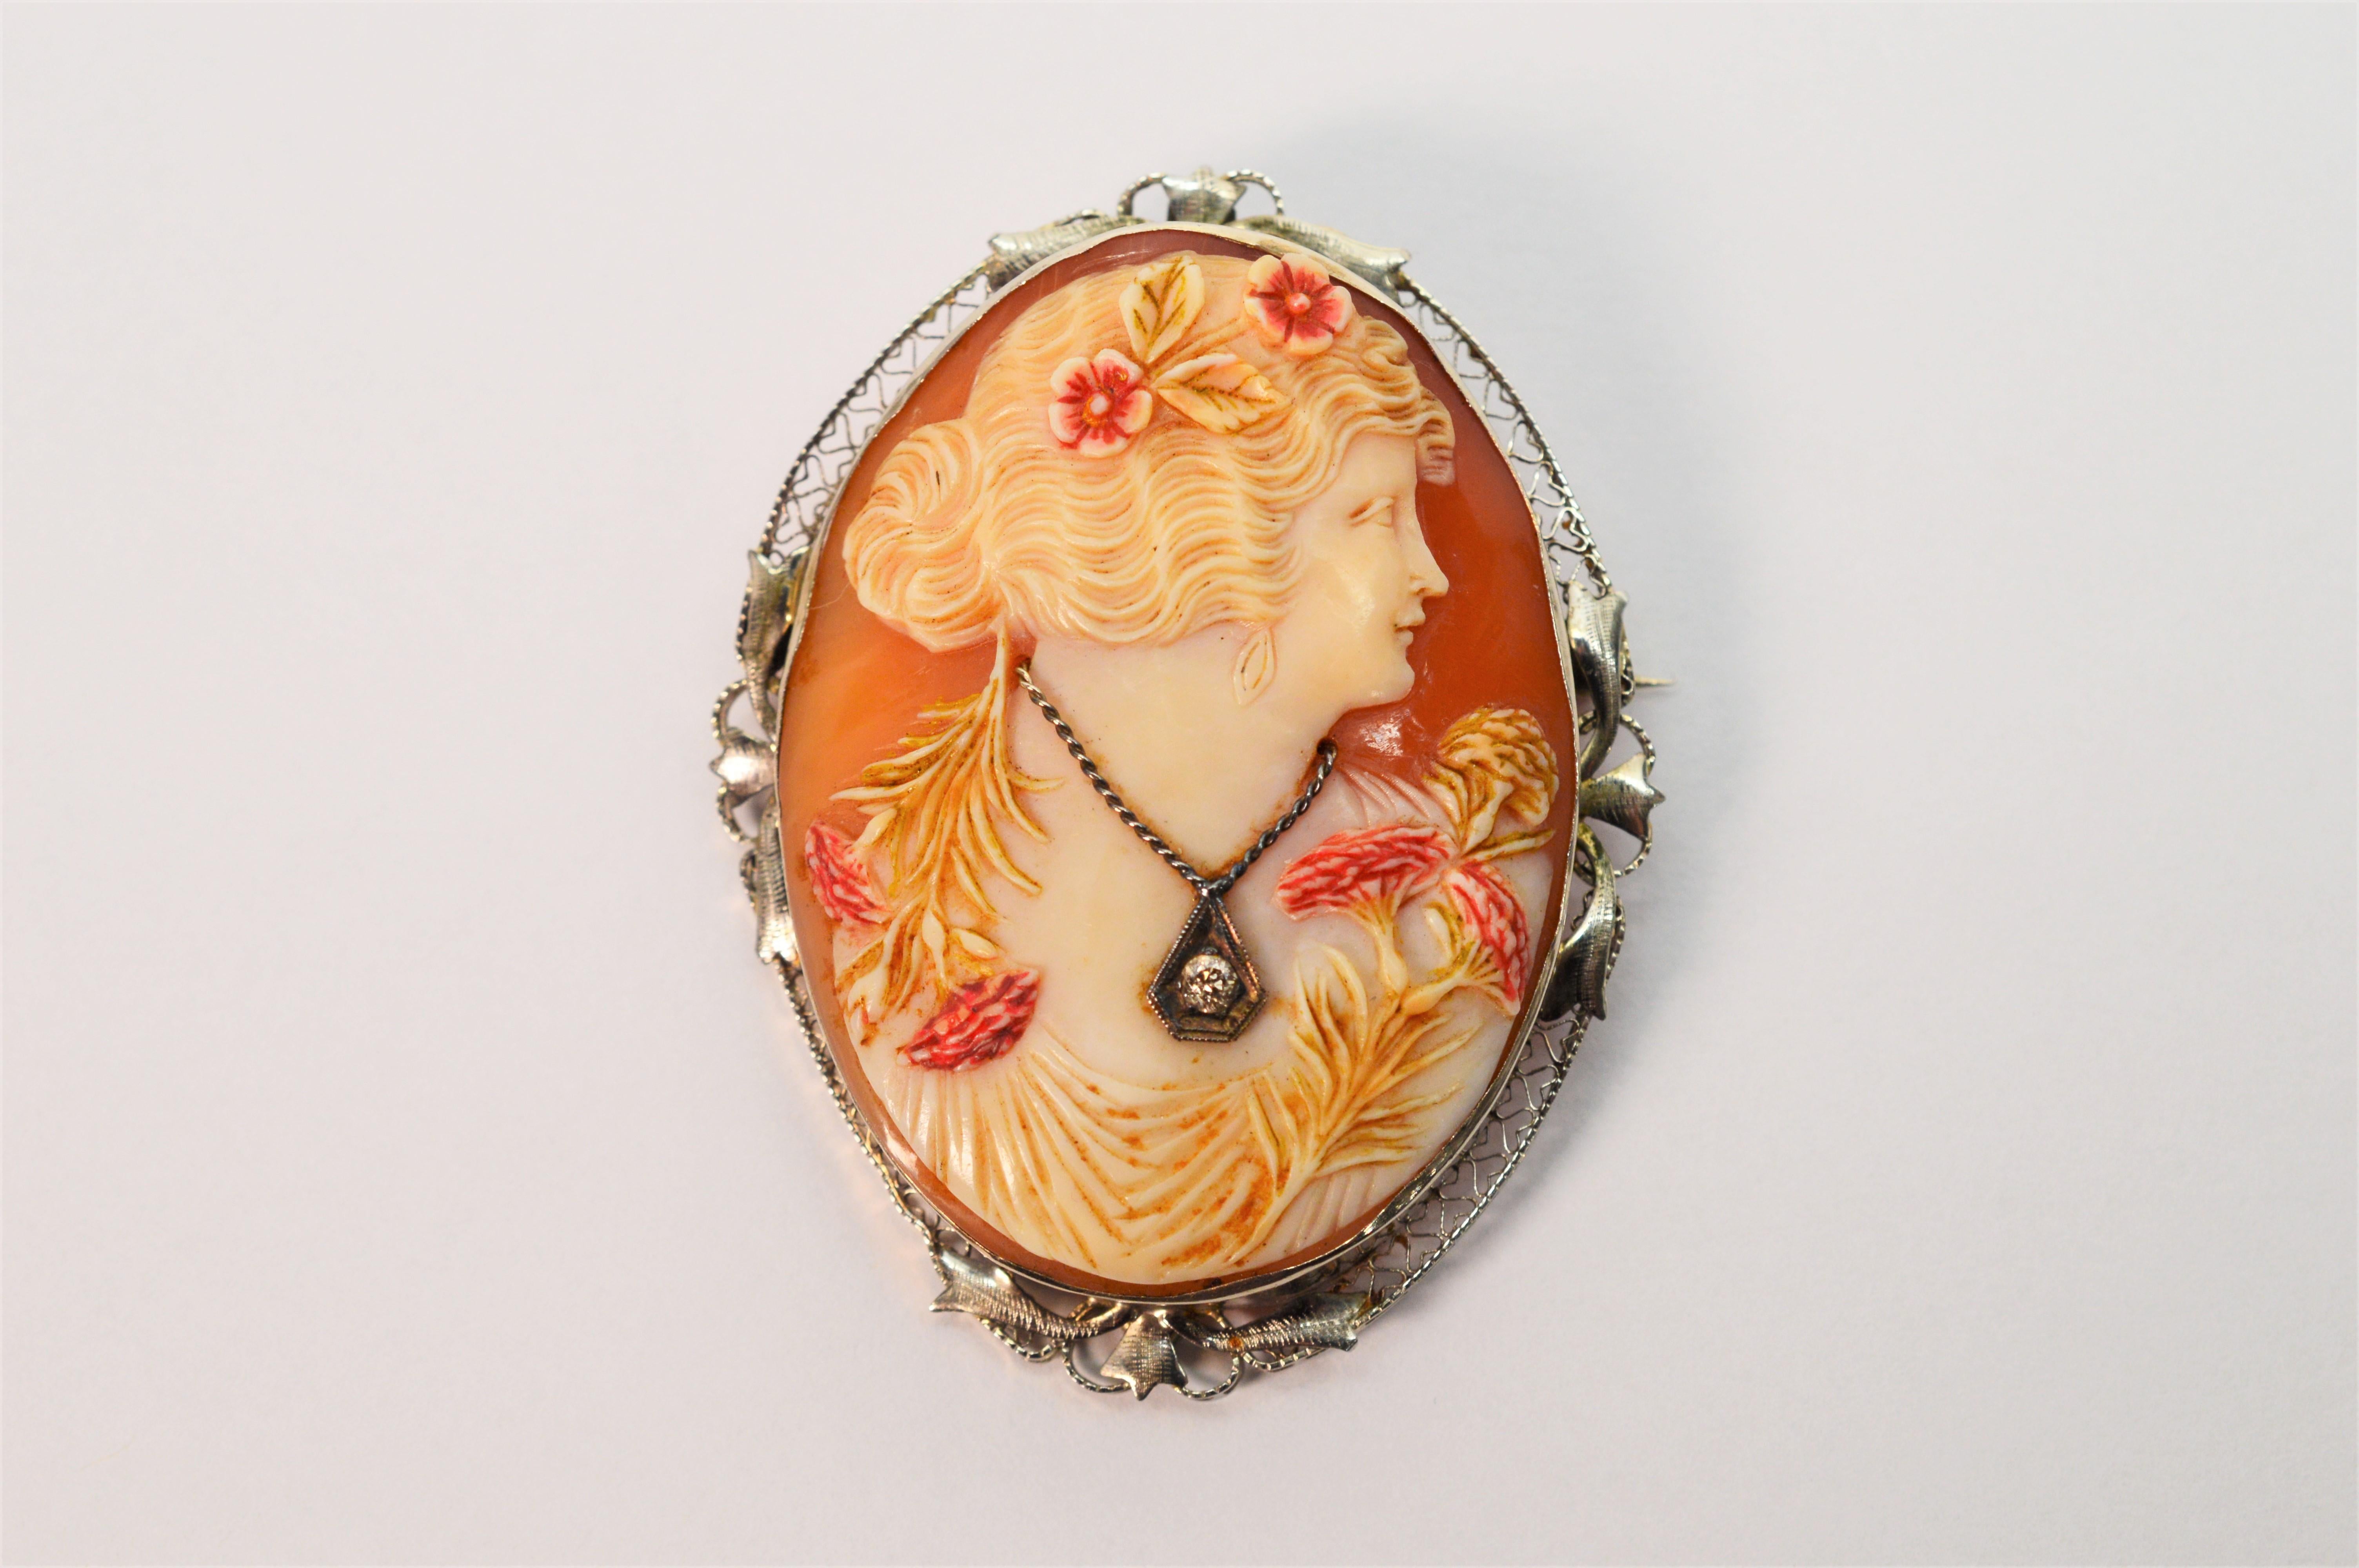 This elegant lady poses proudly in her finery with flowers in her hair and a jewel gracefully draping the neckline. Finely hand carved relief in cornelian shell, the notable floral details are delicately enhanced by hand painted accents. A diamond